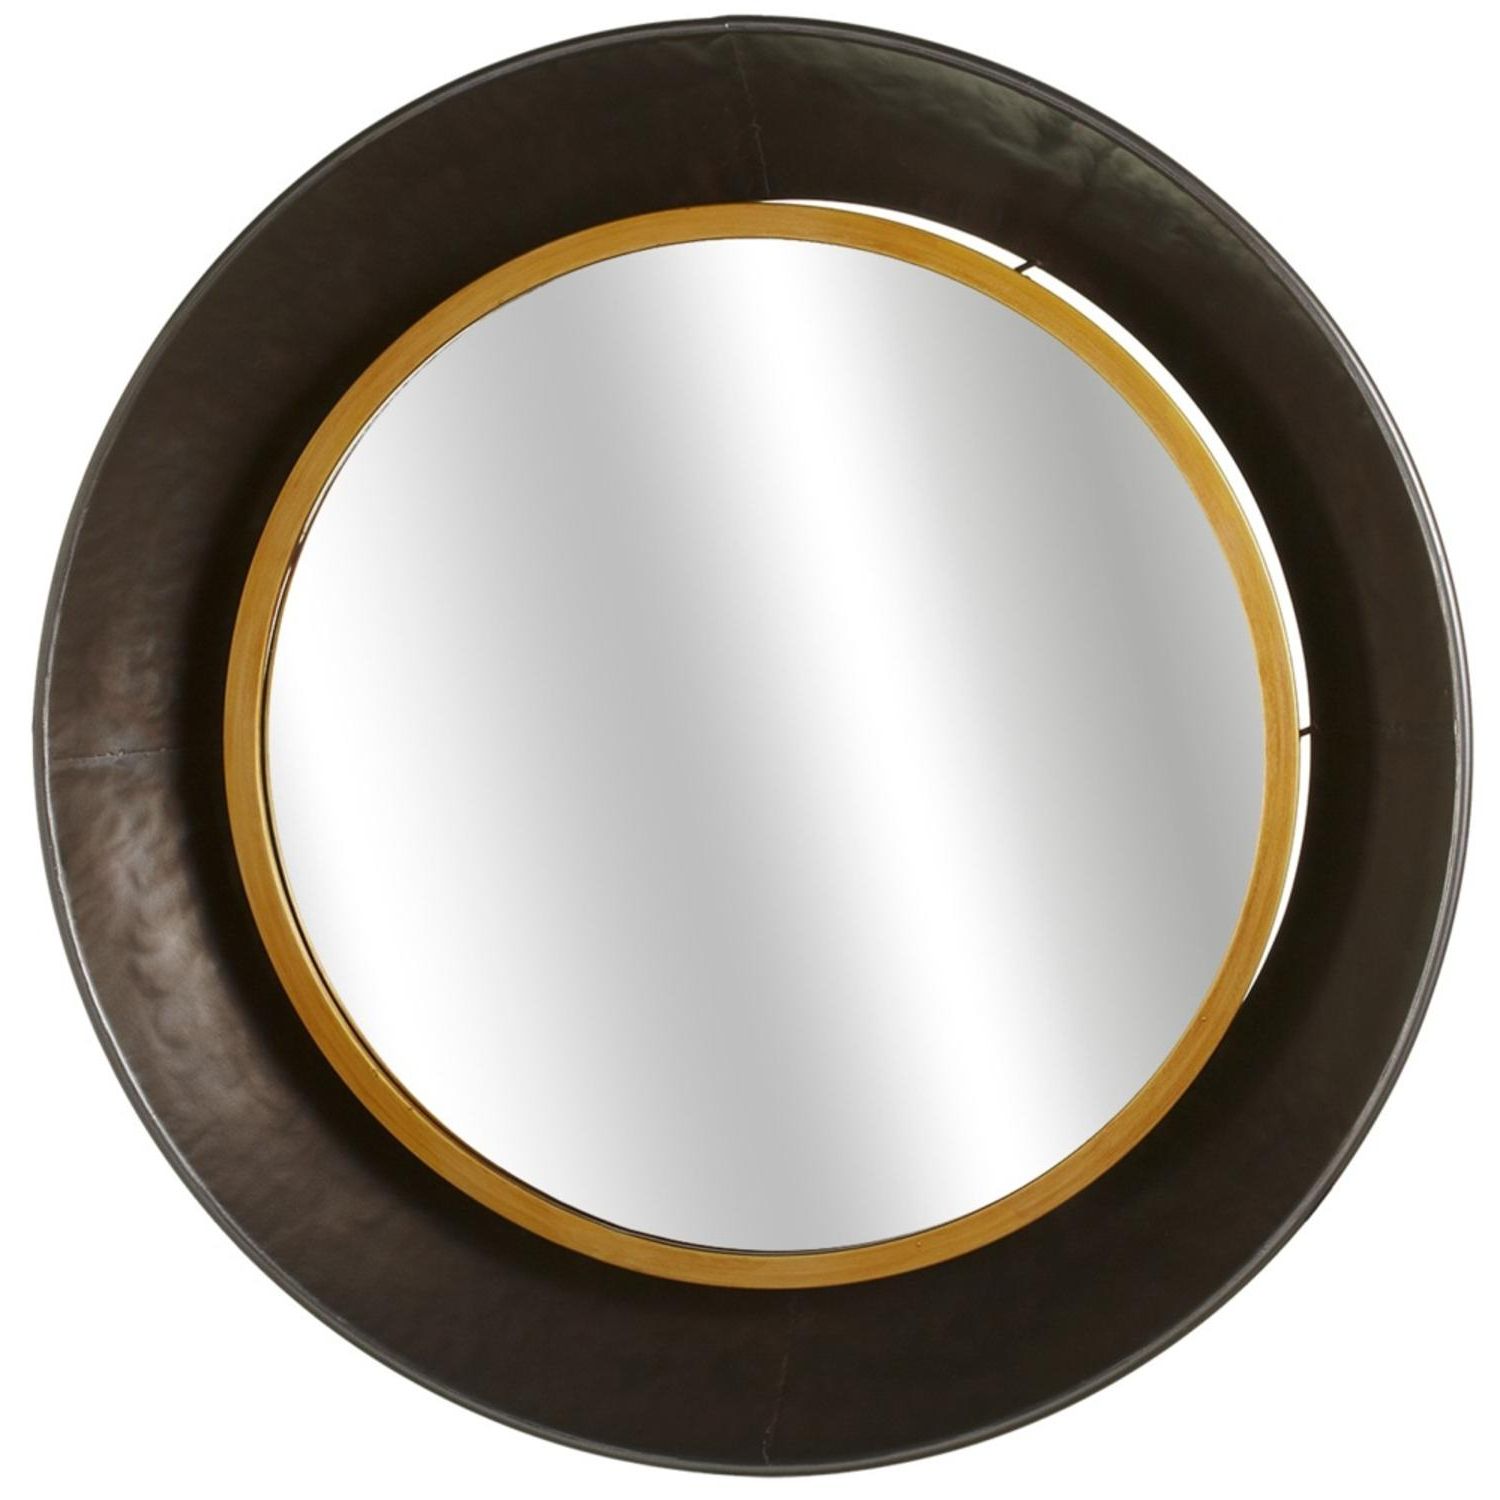 Brown Leather Round Wall Mirrors Regarding Well Known Set Of 2 Brown Decorative Gunmetal Bowl Round Wall Mirror With Gold (View 6 of 15)